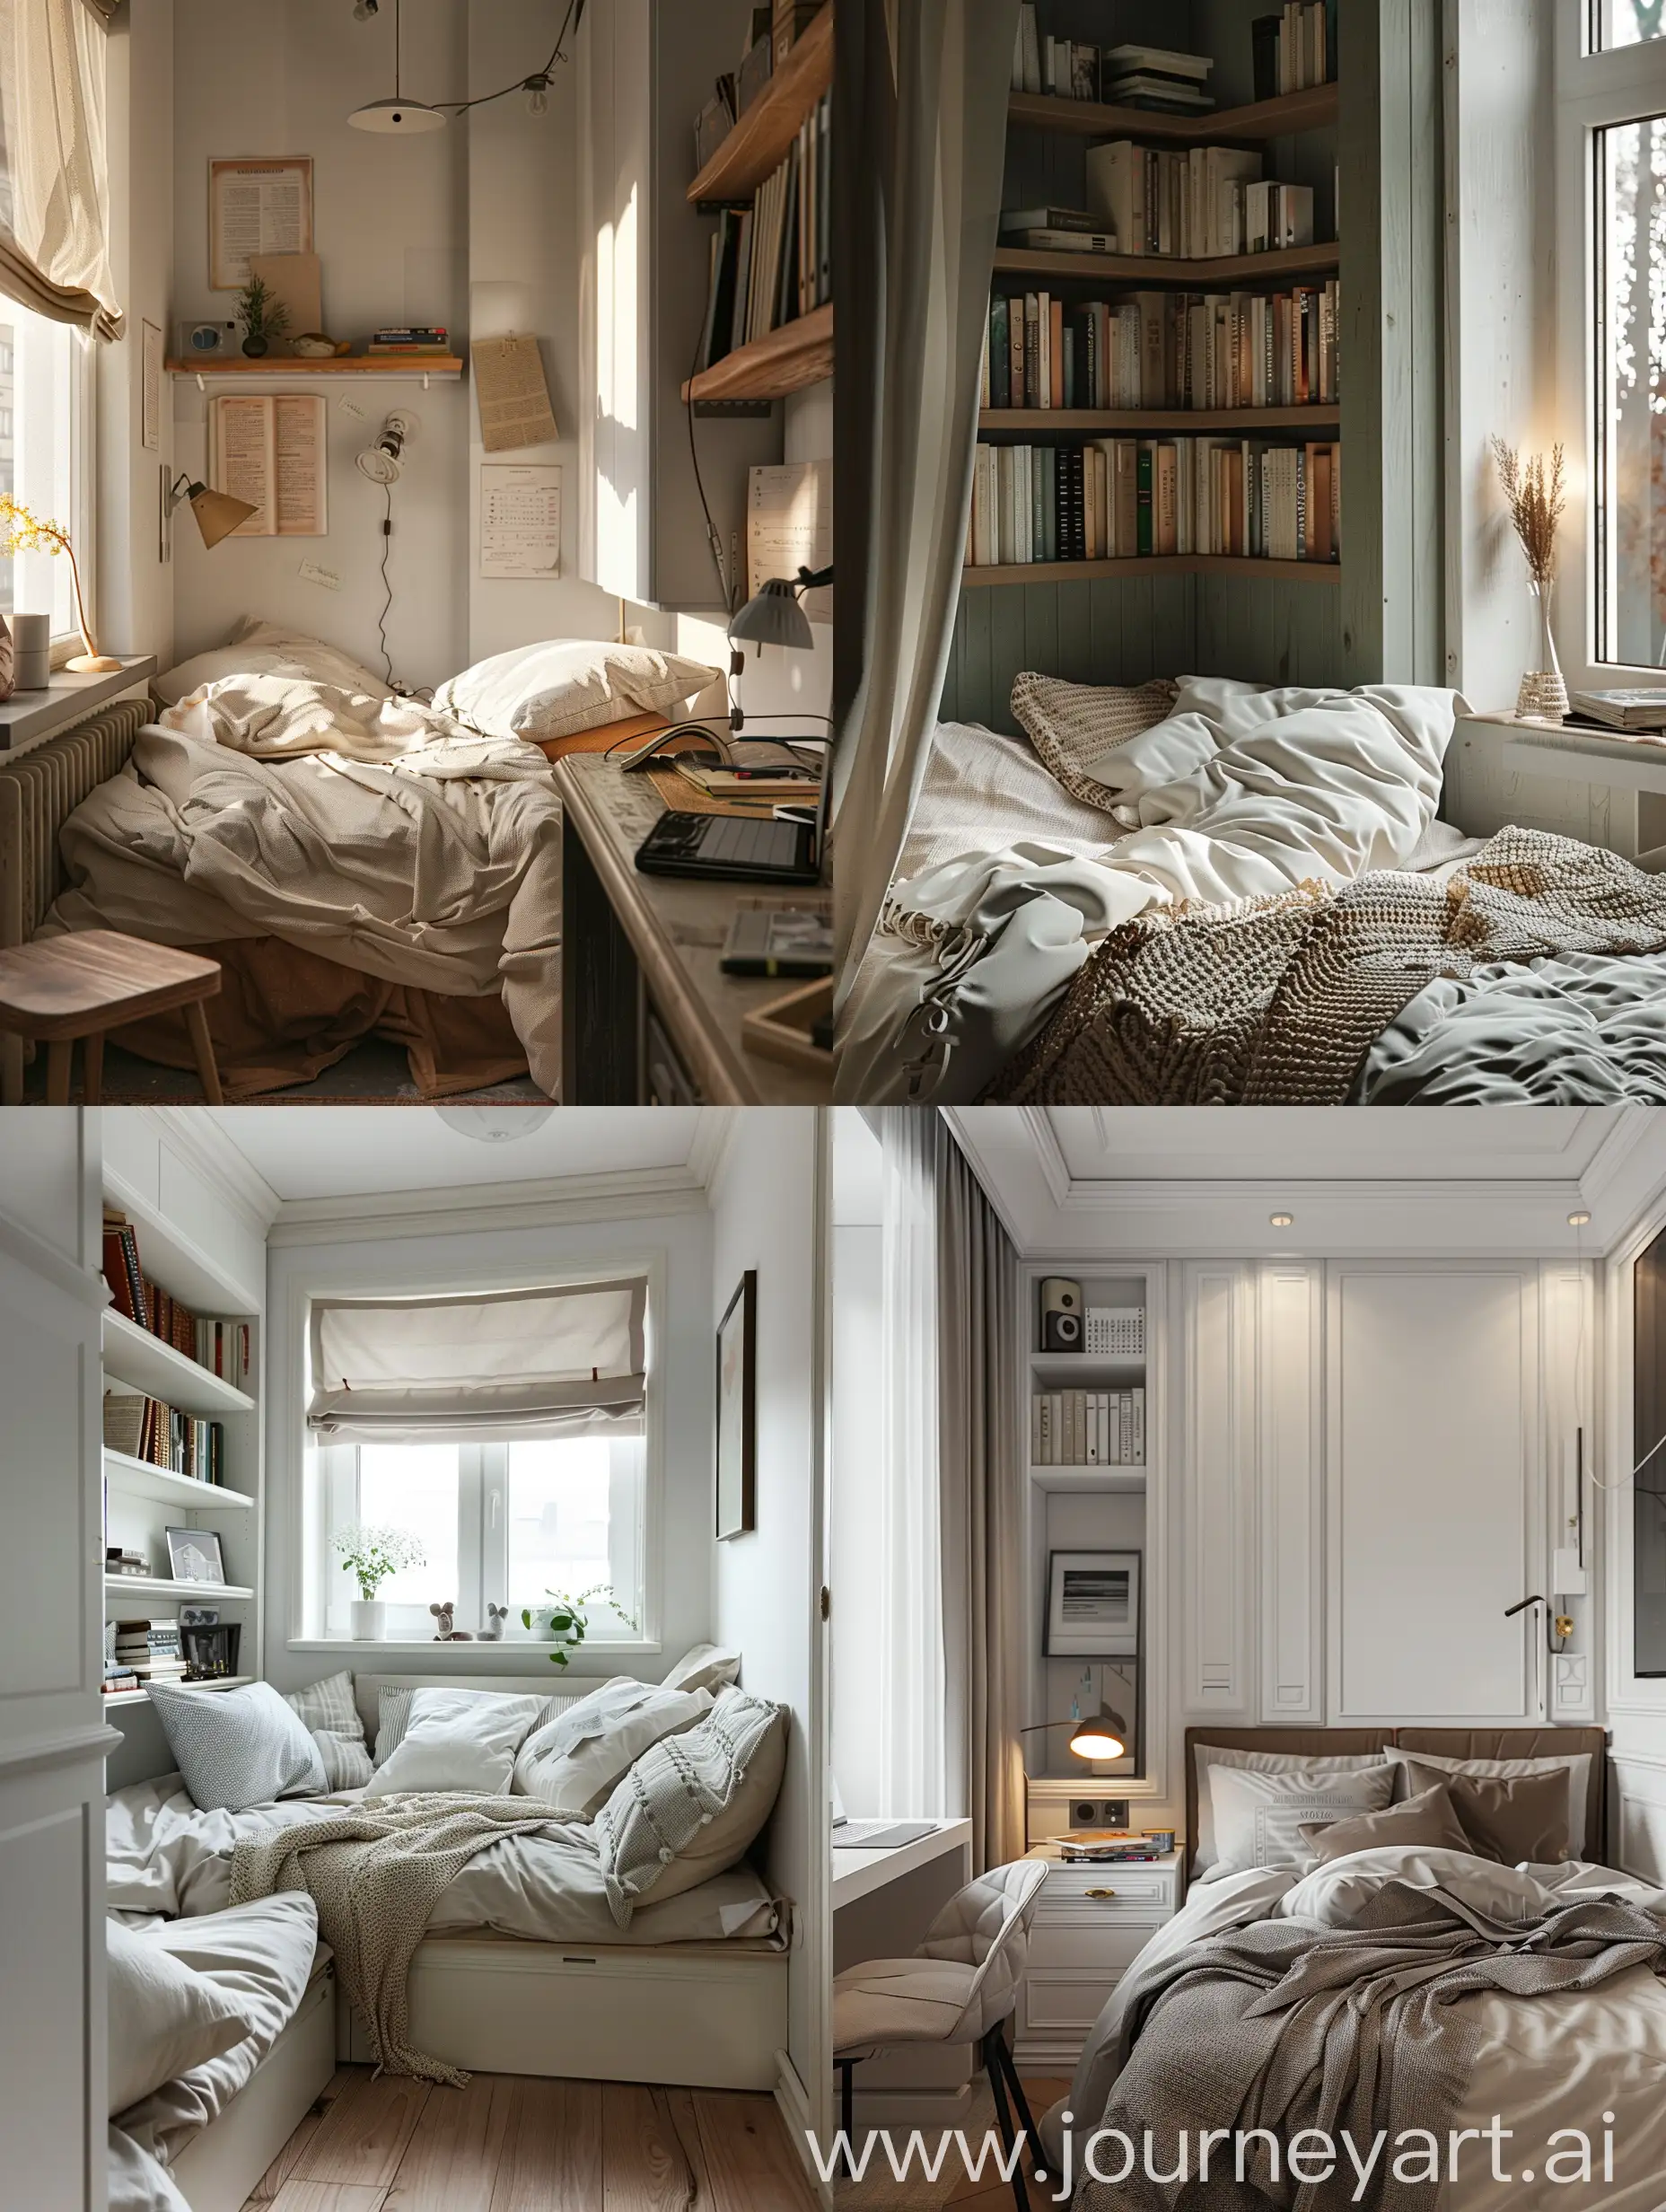 INTERIOR OF THE BEDROOM WHICH HAS A ONE PERSON AND WHITE COLOR OF THE WALL AND COSY FOR STUDYING